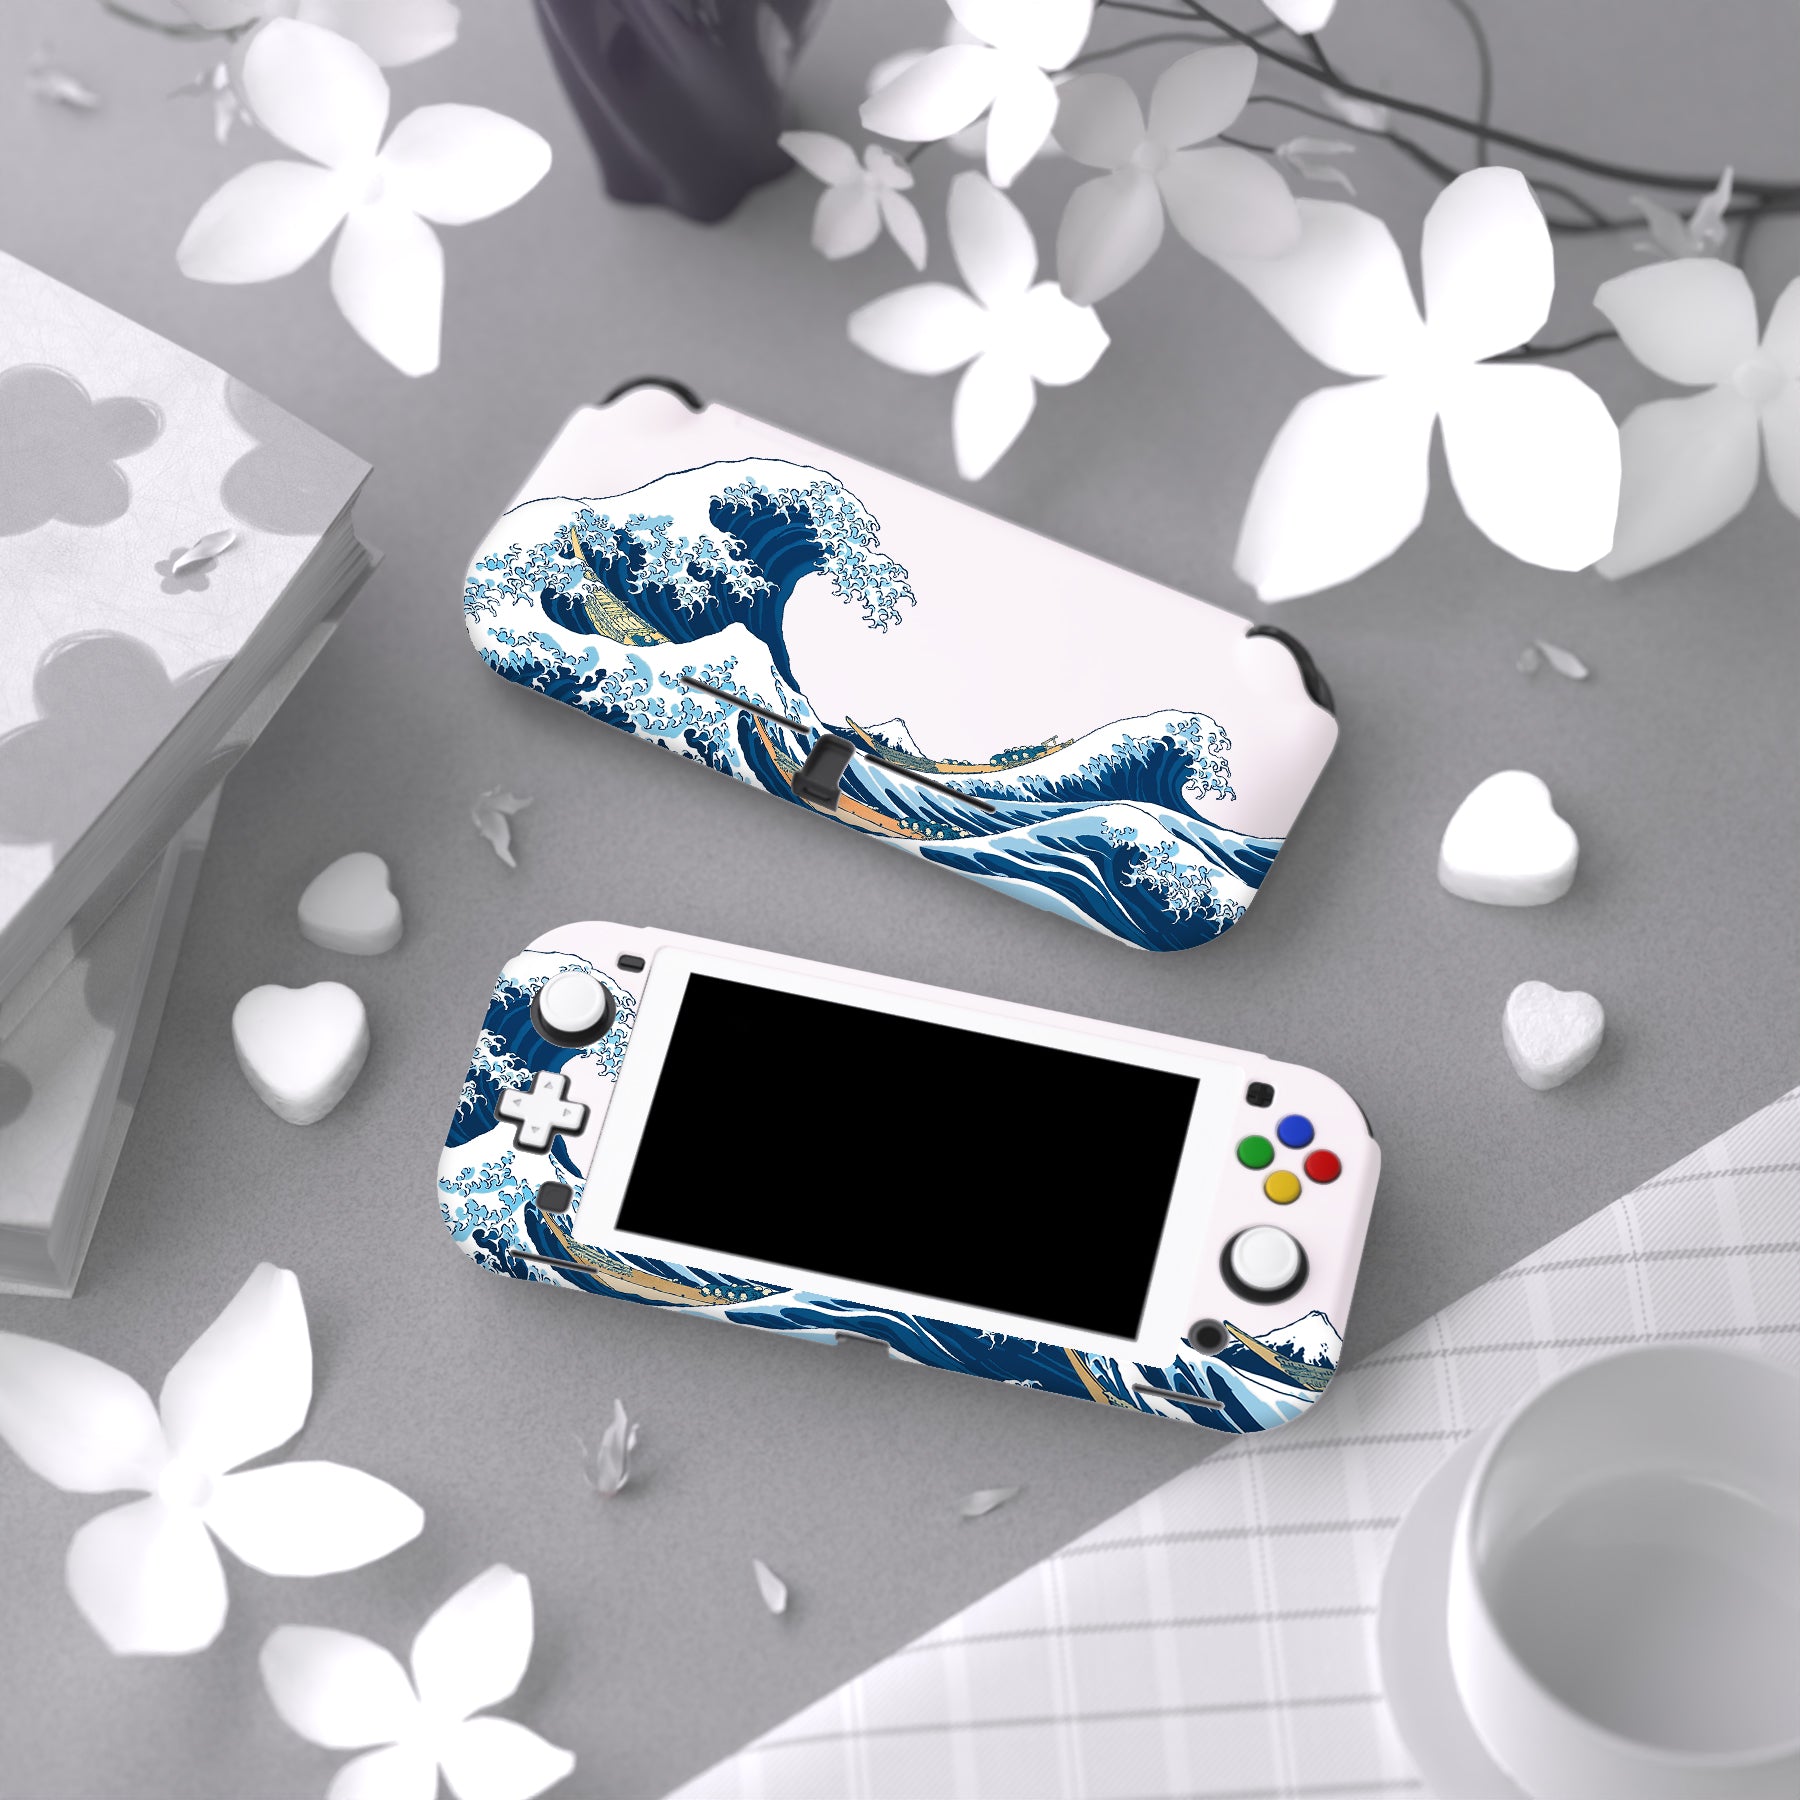 PlayVital ZealProtect Hard Shell Protective Case with Screen Protector &  Thumb Grip Caps & Button Caps for NS Switch Lite - The Great Wave off 